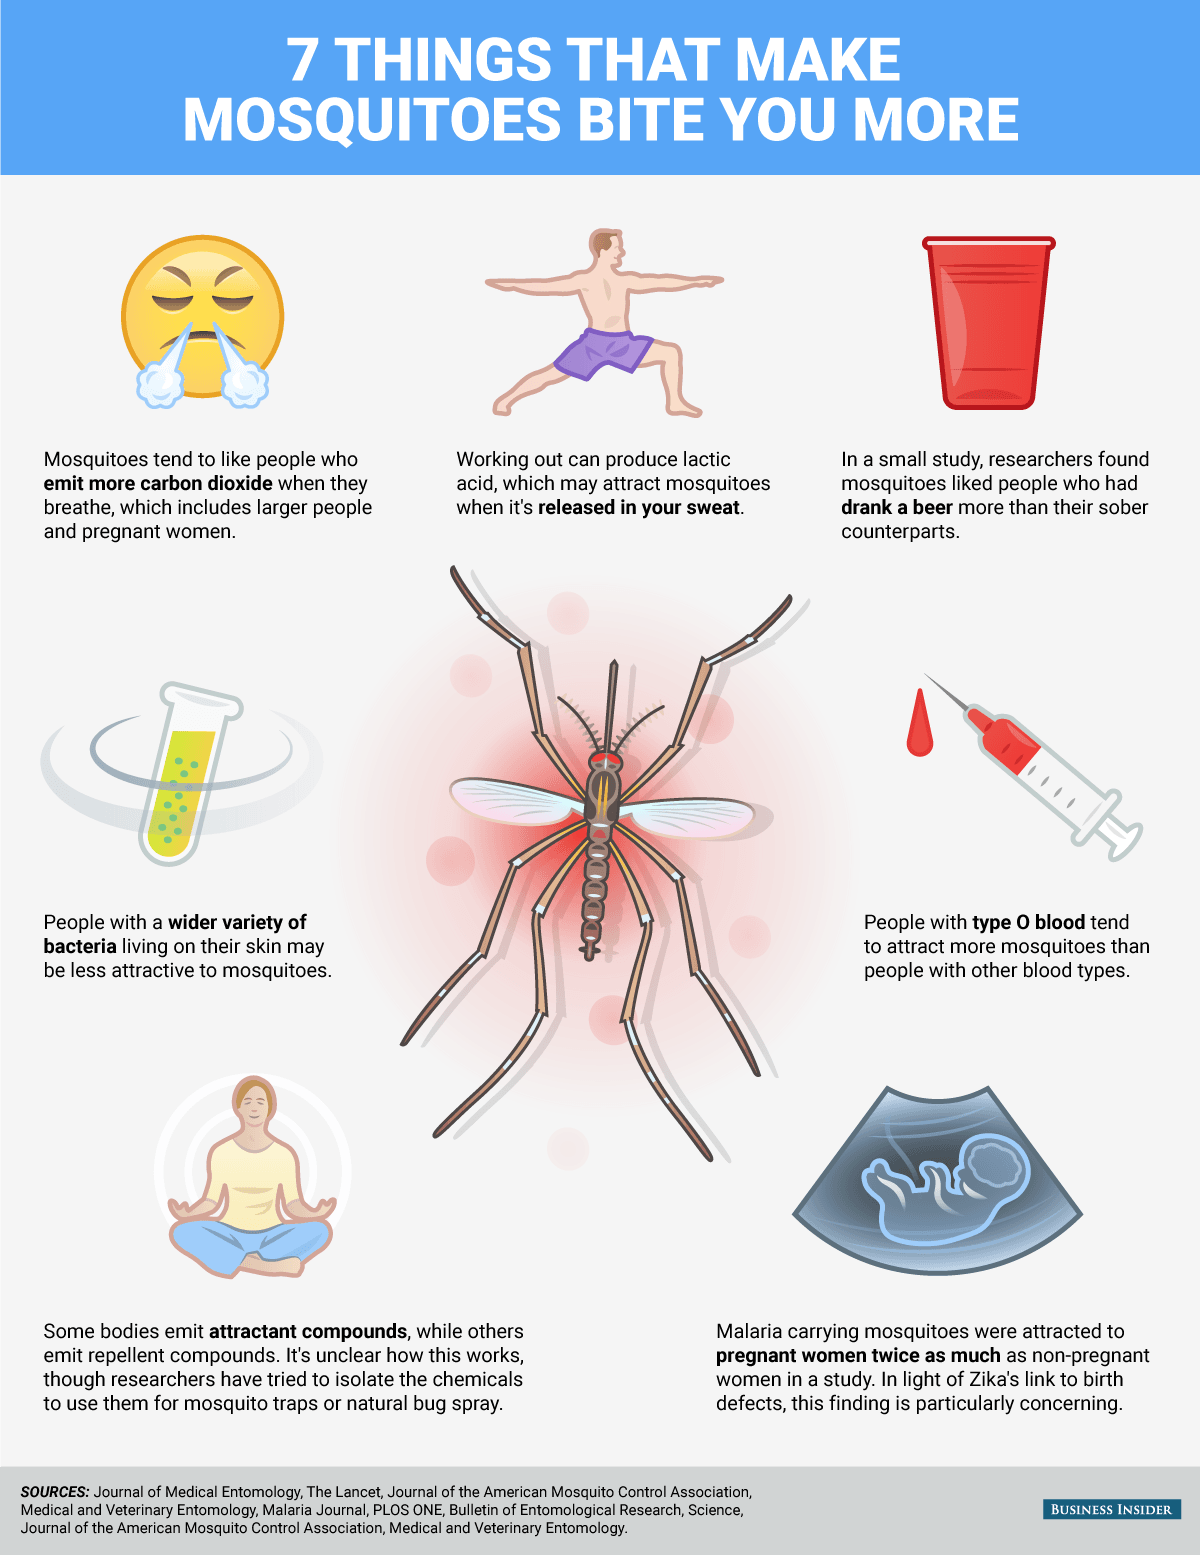 Symptoms of Mosquito bite and diseases caused